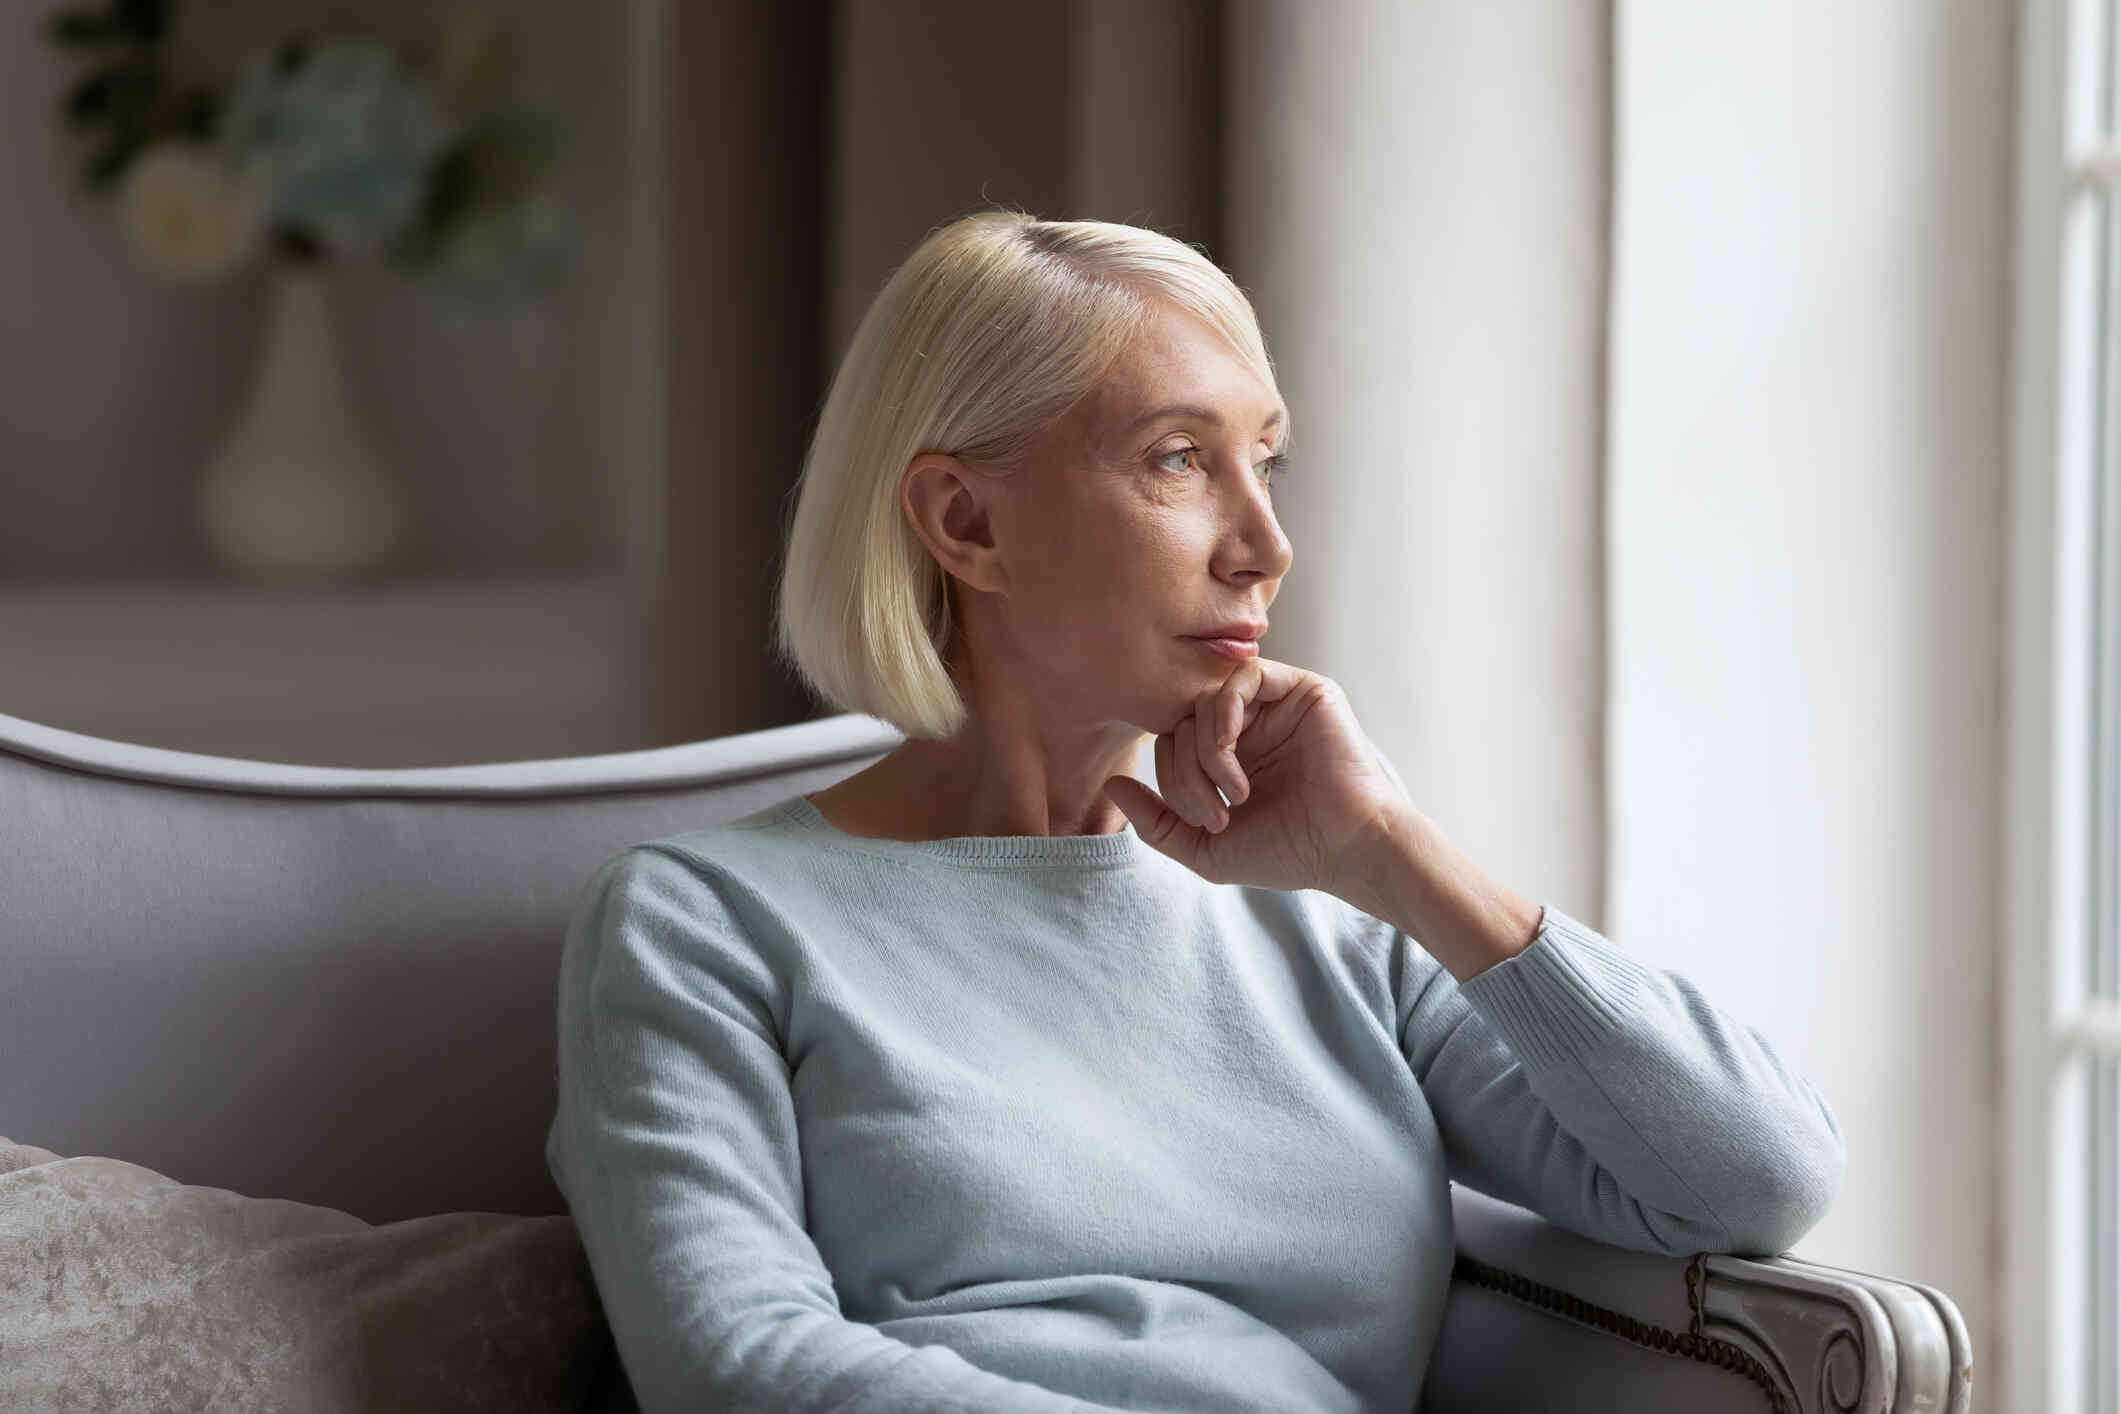 A middle aged woman sits in an armchair and rests her chin against her hand while gazinf off deep in thought.